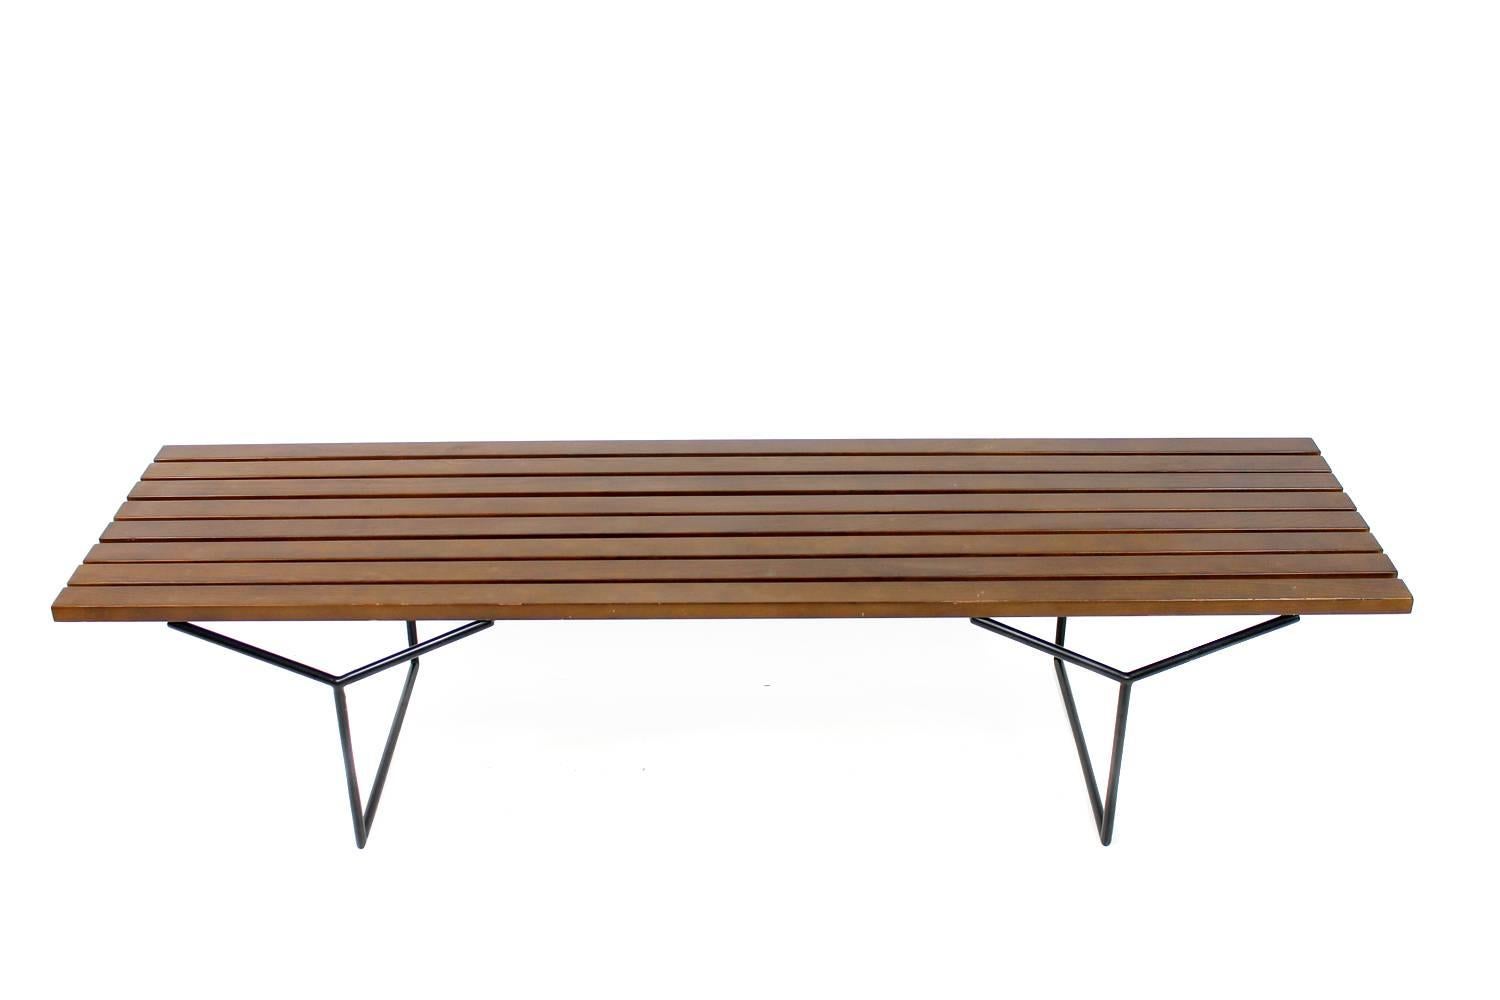 Beautiful bench, beechwood and metal frame, attributed to Harry Bertoia, was bought in the 1980s 
Good vintage condition, the beechwood dark stained, only minor wear consistent with age and use. The metal base is very good, the label is missing.
